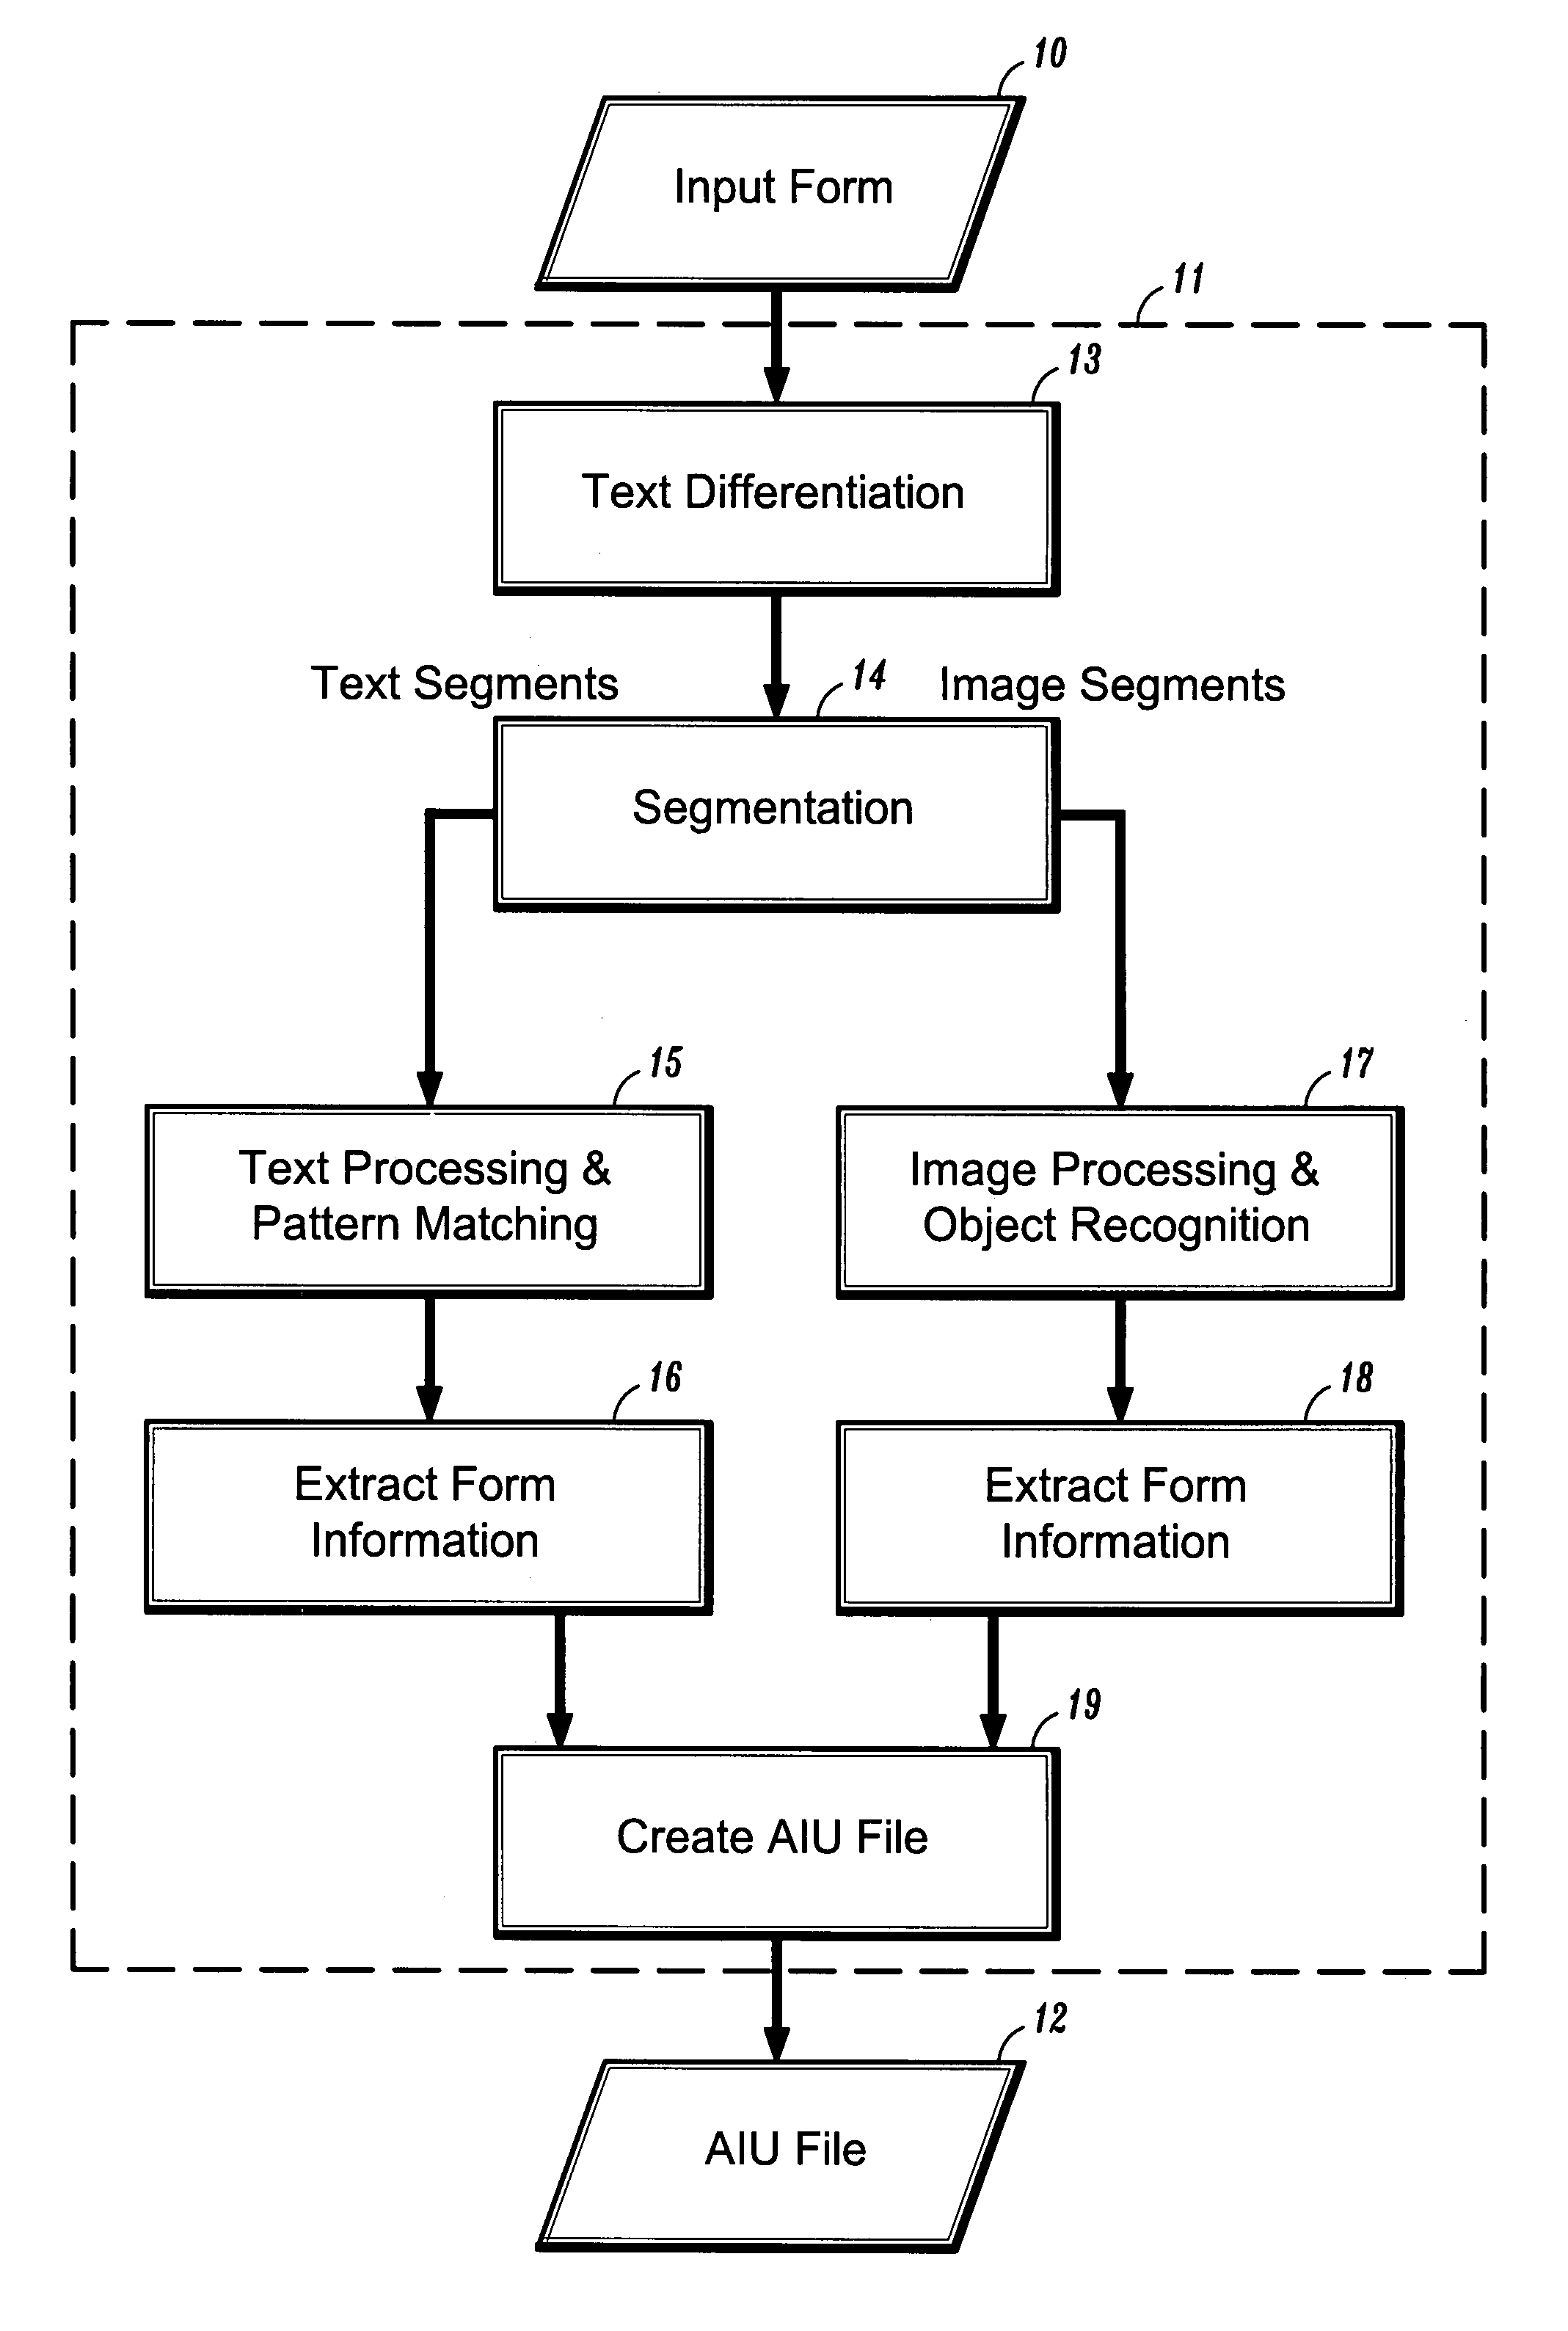 Systems and methods for automatic form segmentation for raster-based passive electronic documents